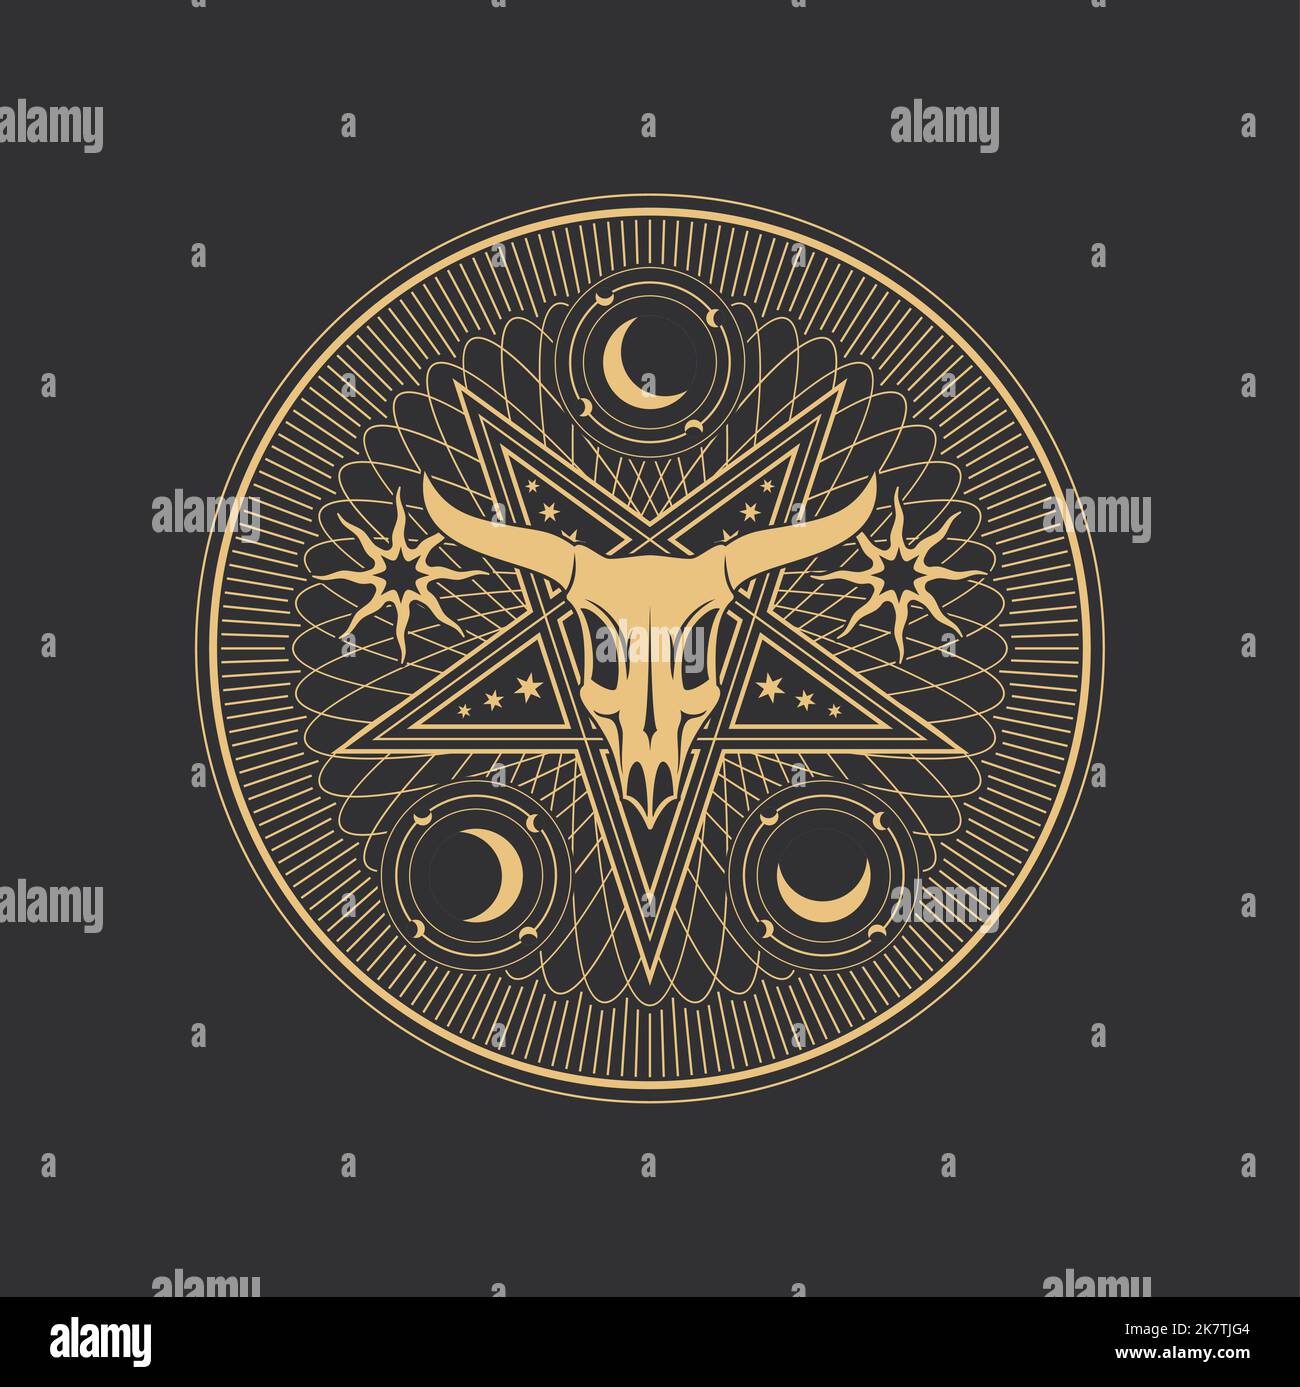 Occult pentagram, Baphomet skull in pentacle star, esoteric tarot and magic vector symbol. Occultism, alchemy and cult ritual sign of Baphomet devil or goat skull with star and moon in occult circle Stock Vector